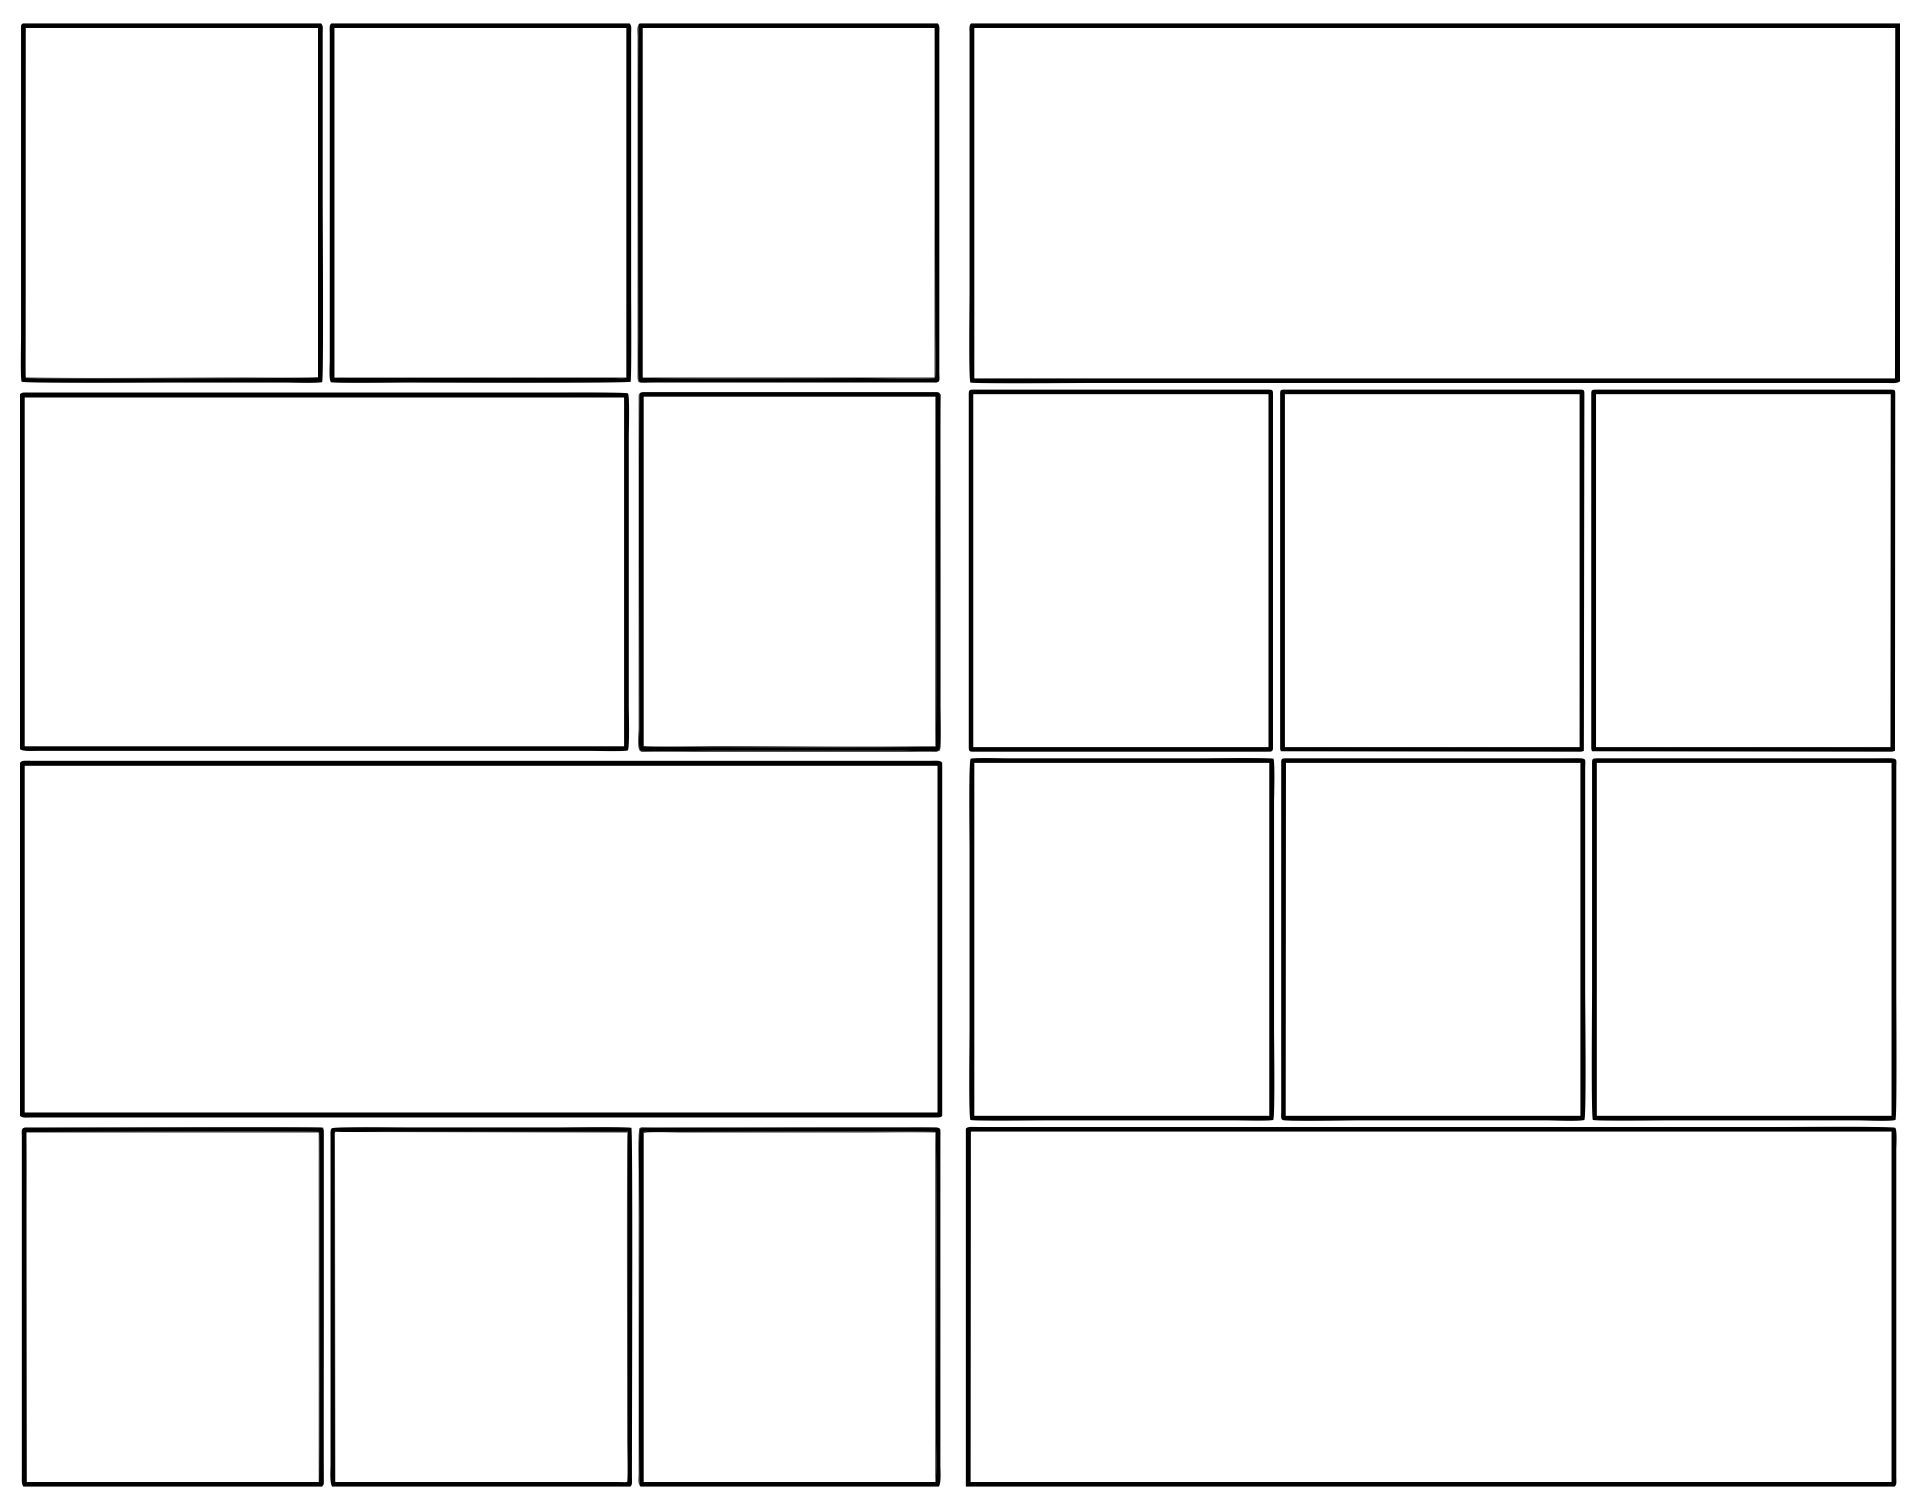 Comic Book Panel Layout Template